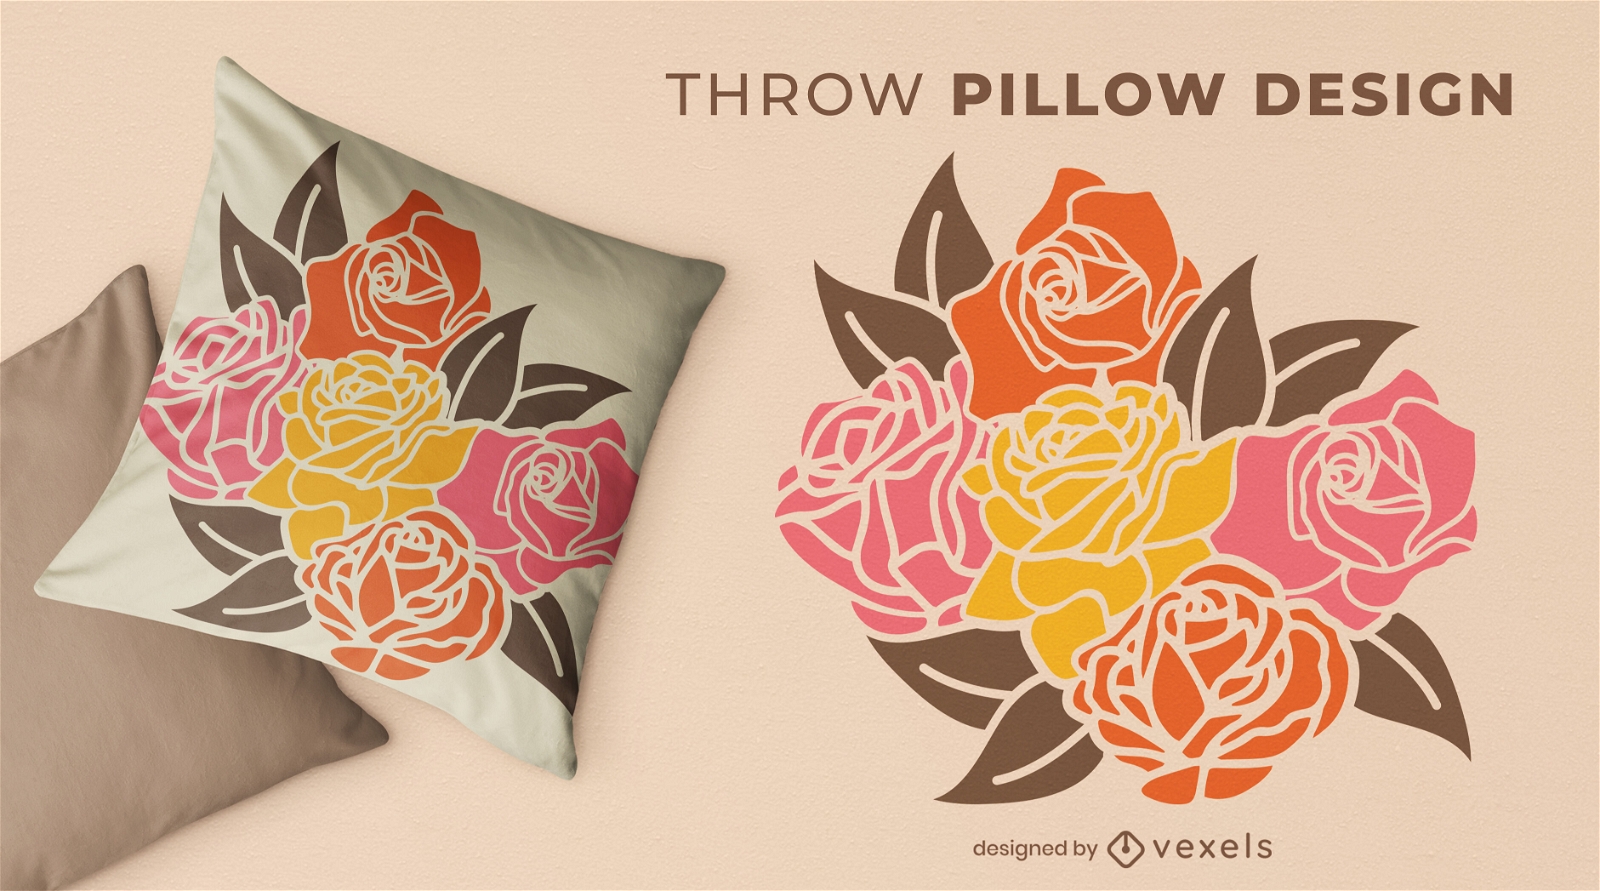 Roses in different colors throw pillow design